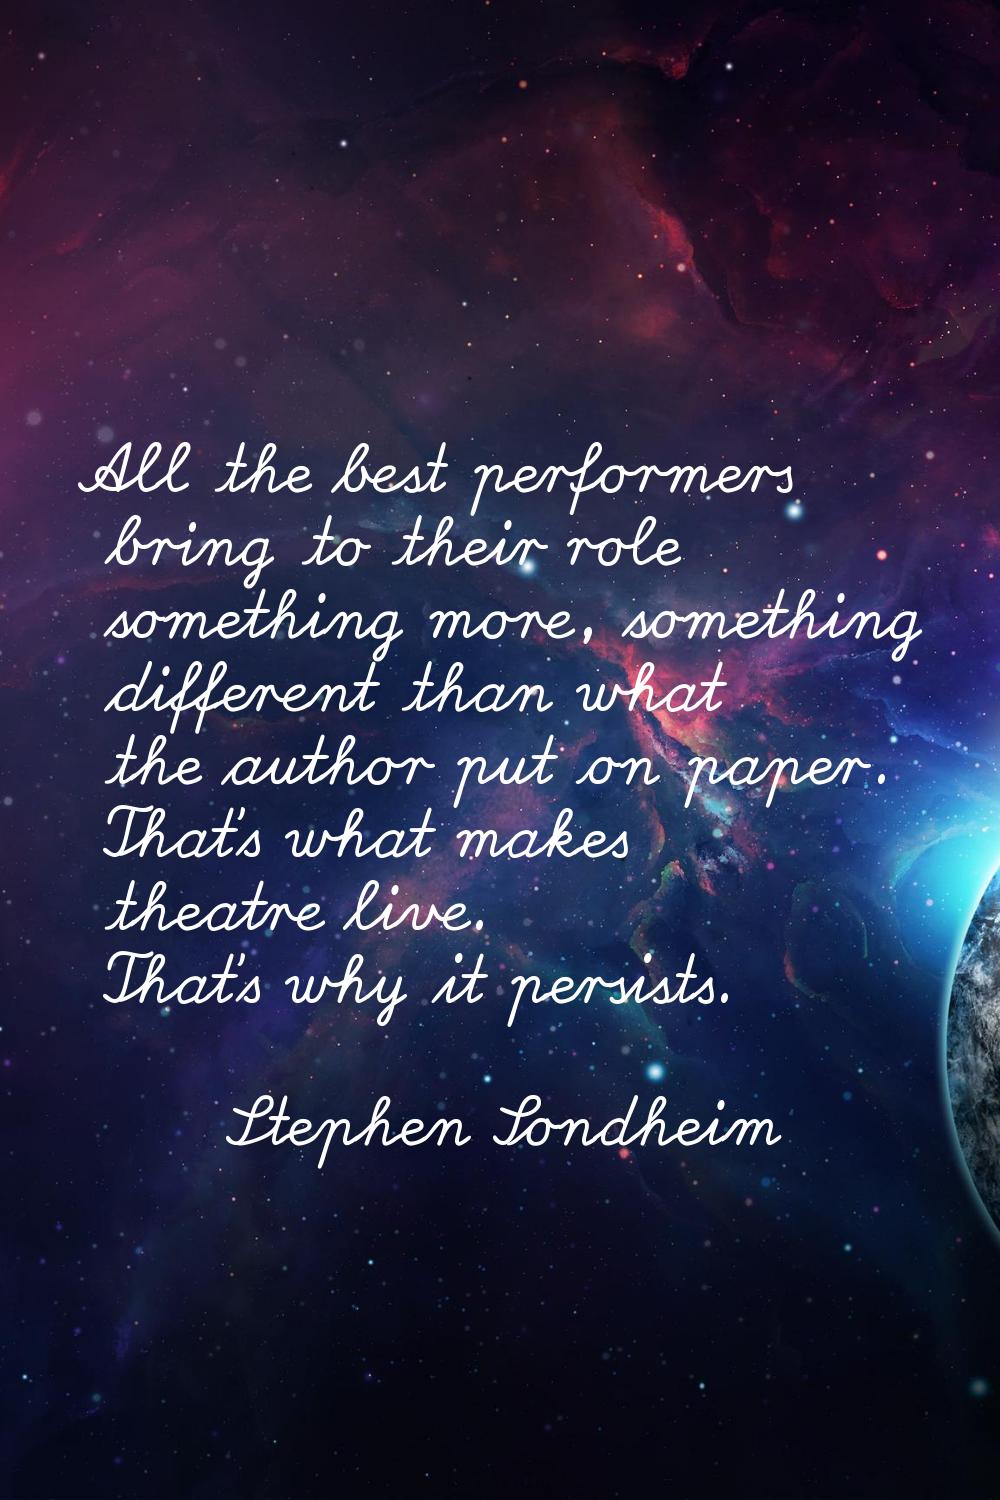 All the best performers bring to their role something more, something different than what the autho